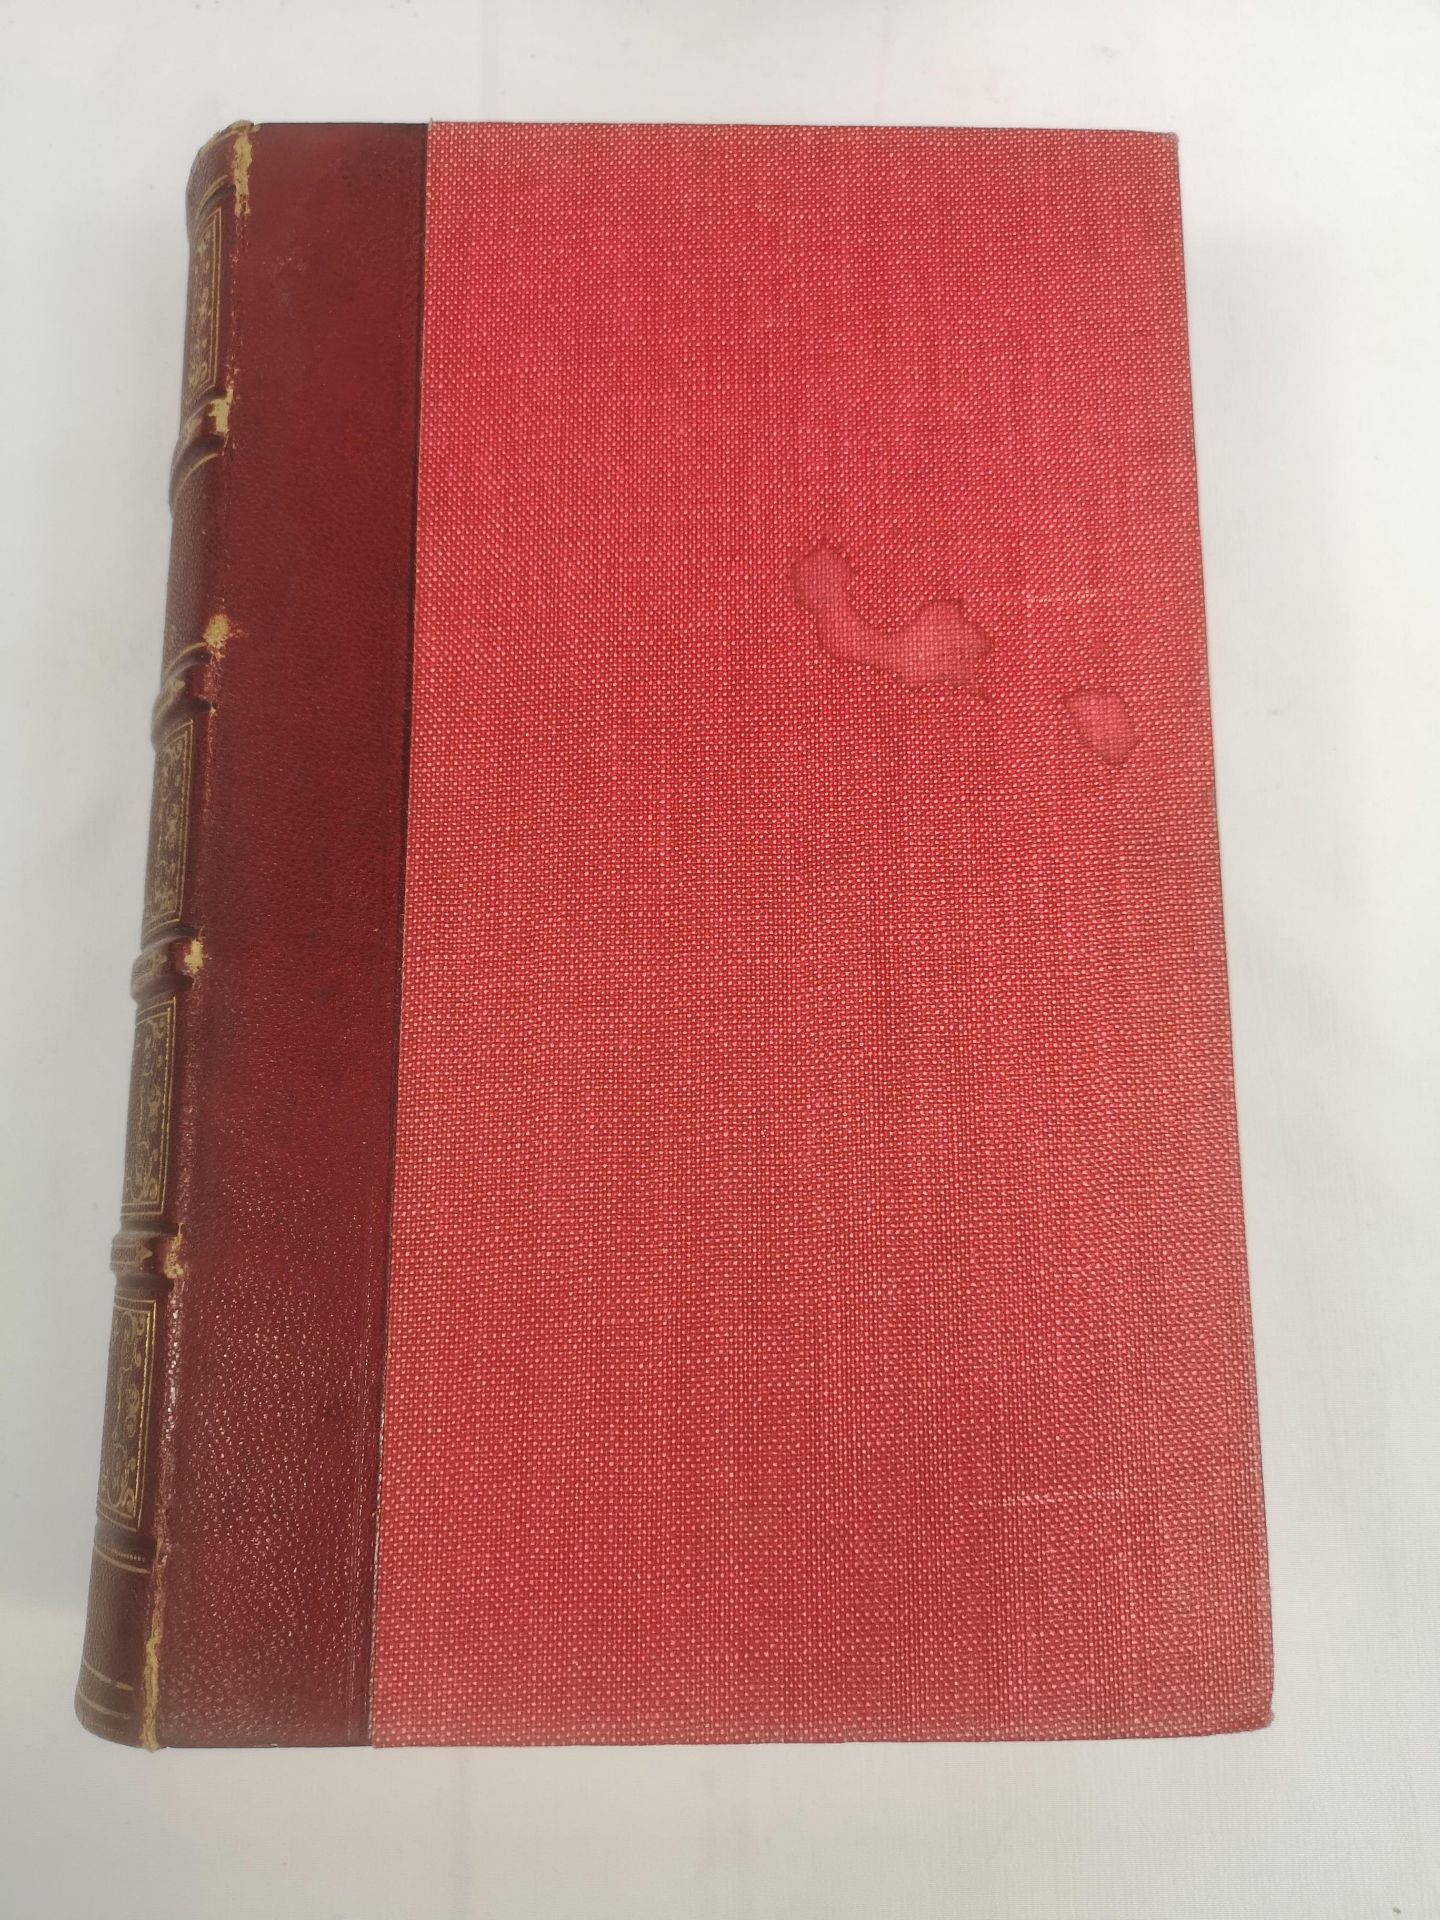 Collection of leather bound books - Image 4 of 11